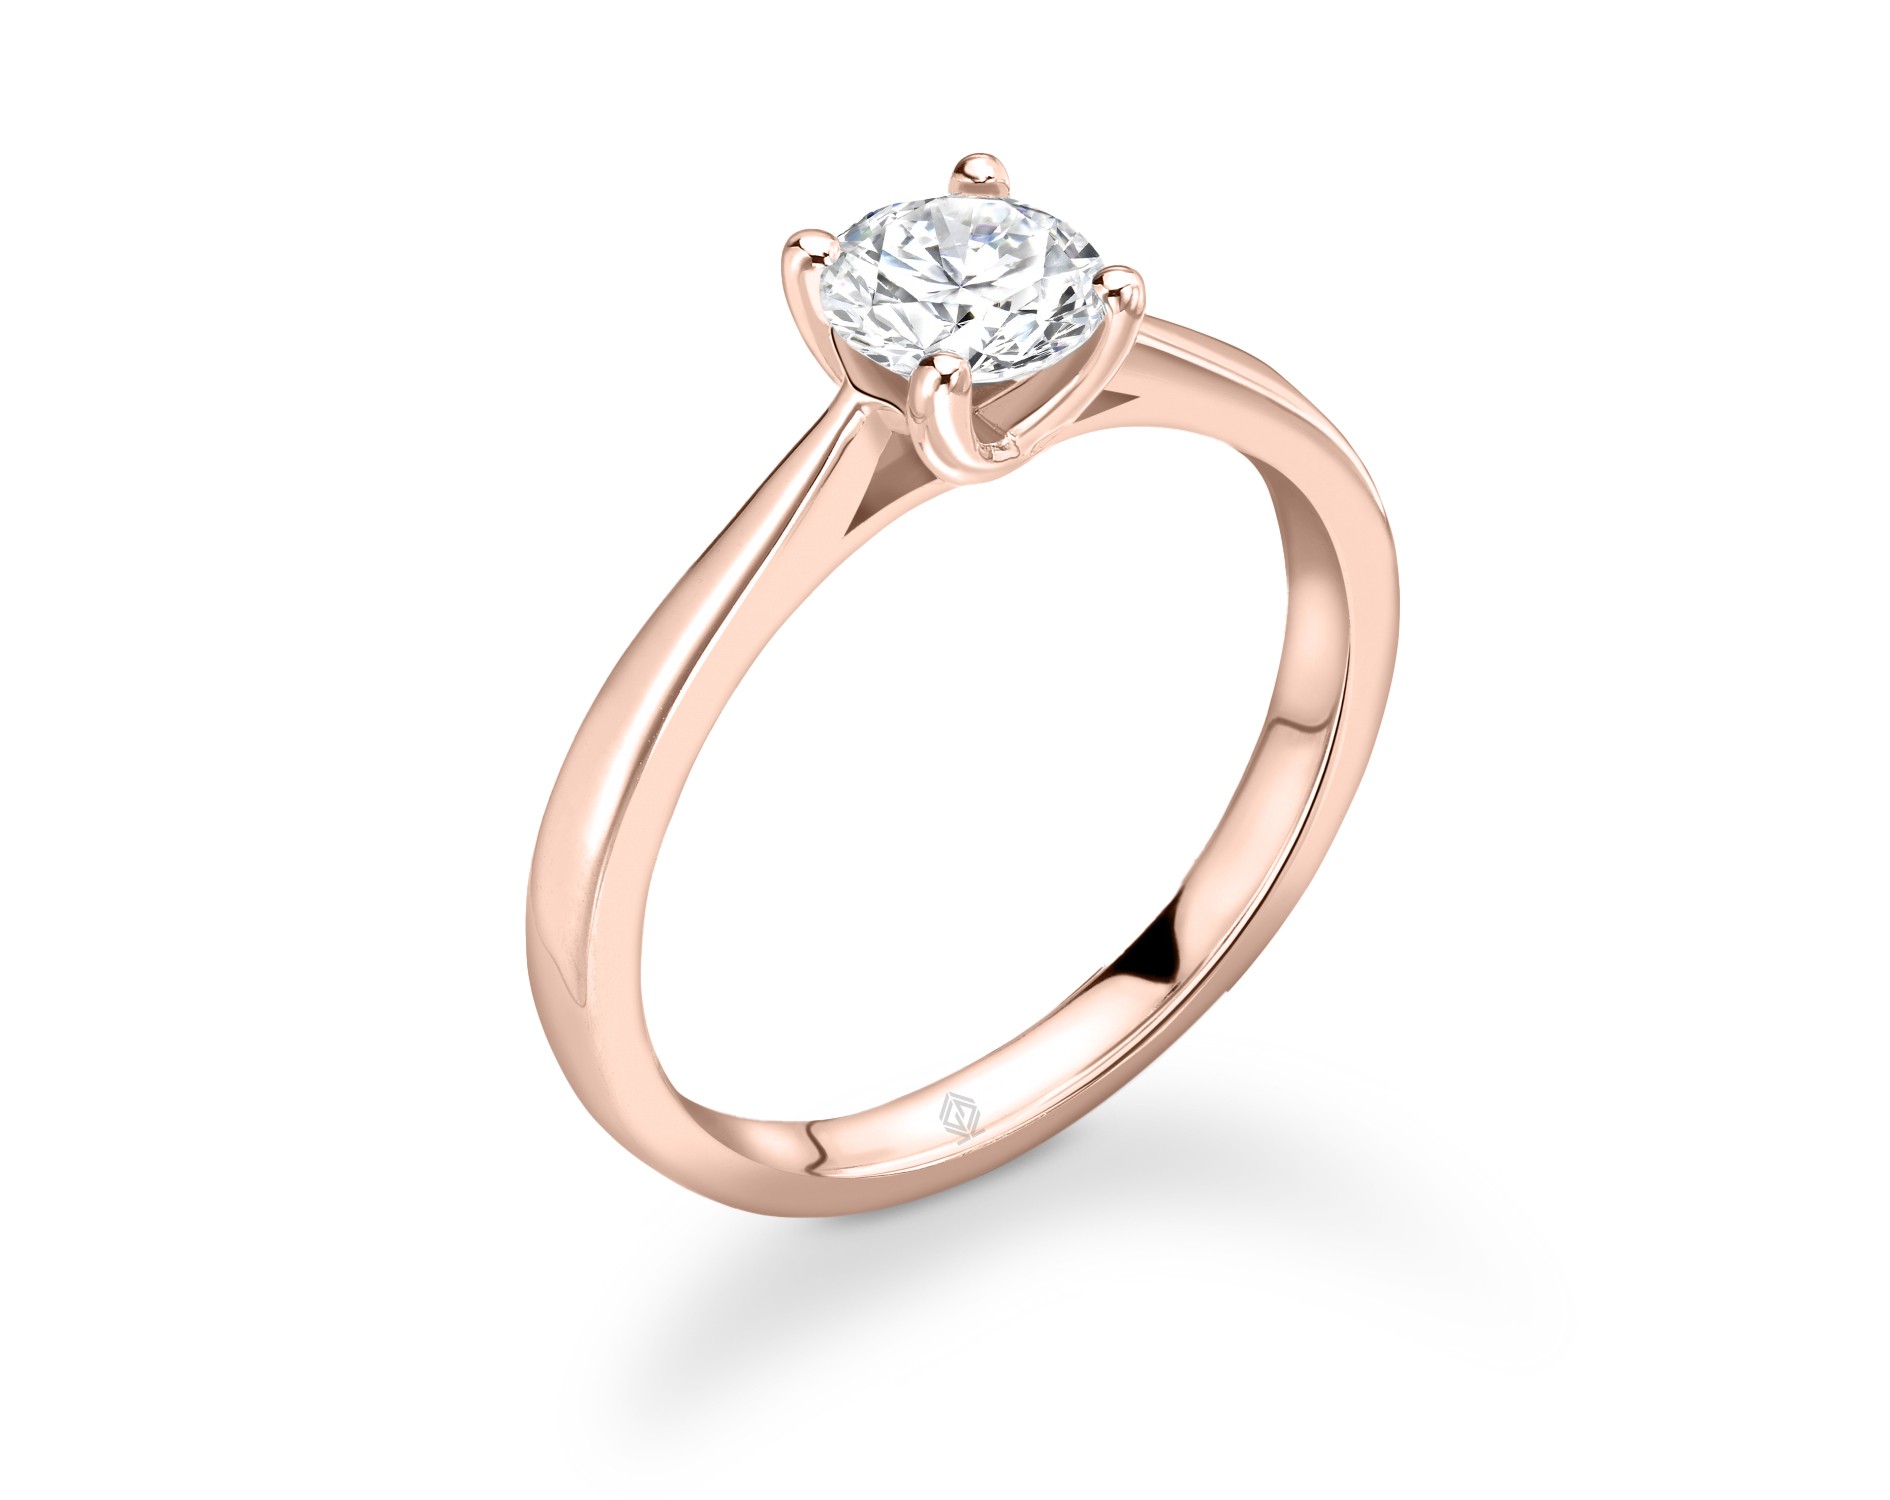 18K ROSE GOLD 4 PRONGS SOLITAIRE ROUND CUT DIAMOND ENGAGEMENT RING